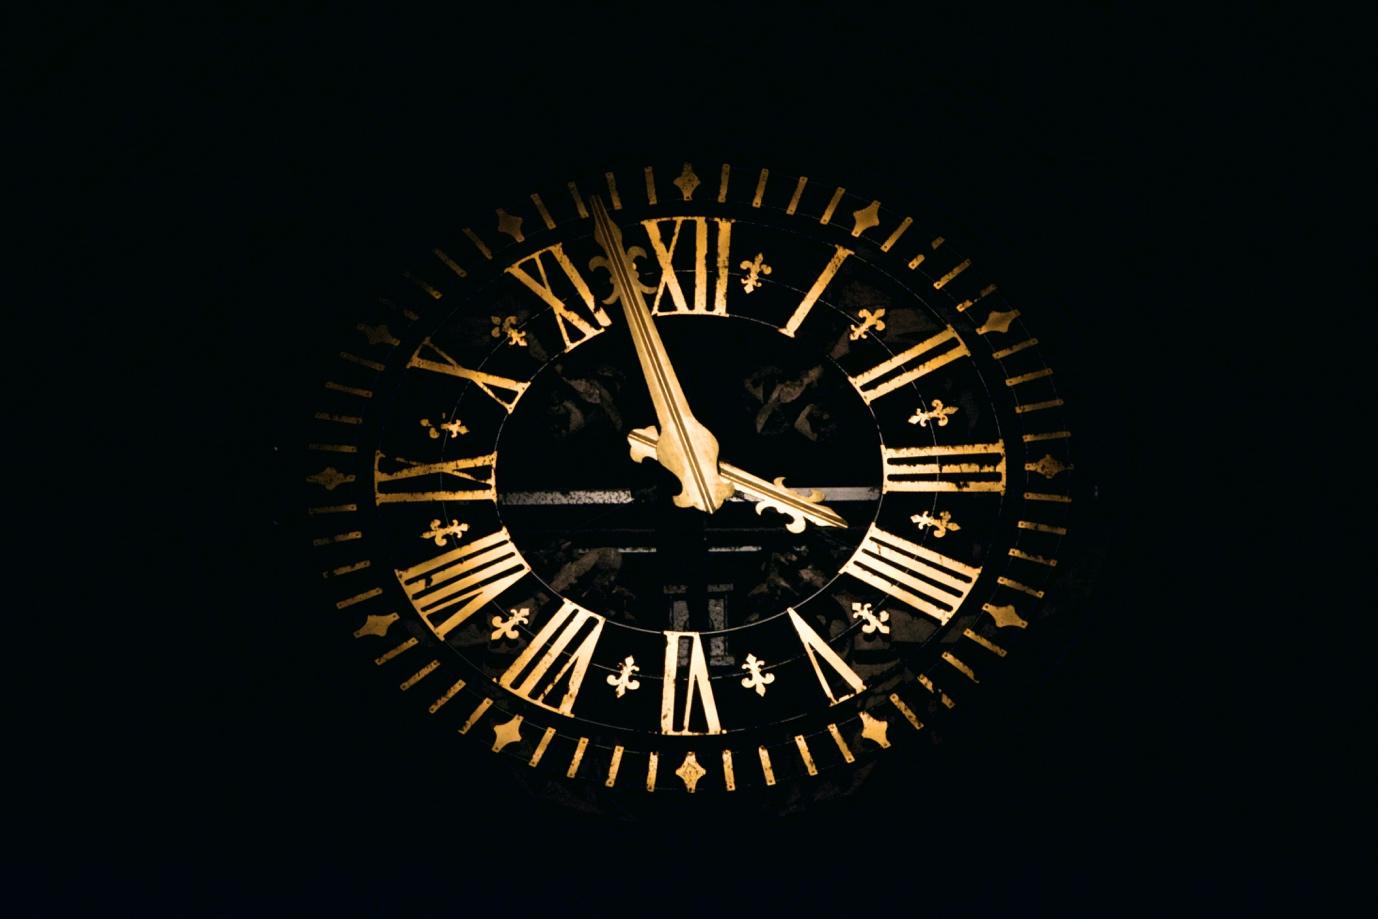 A clock with roman numerals

Description automatically generated with medium confidence